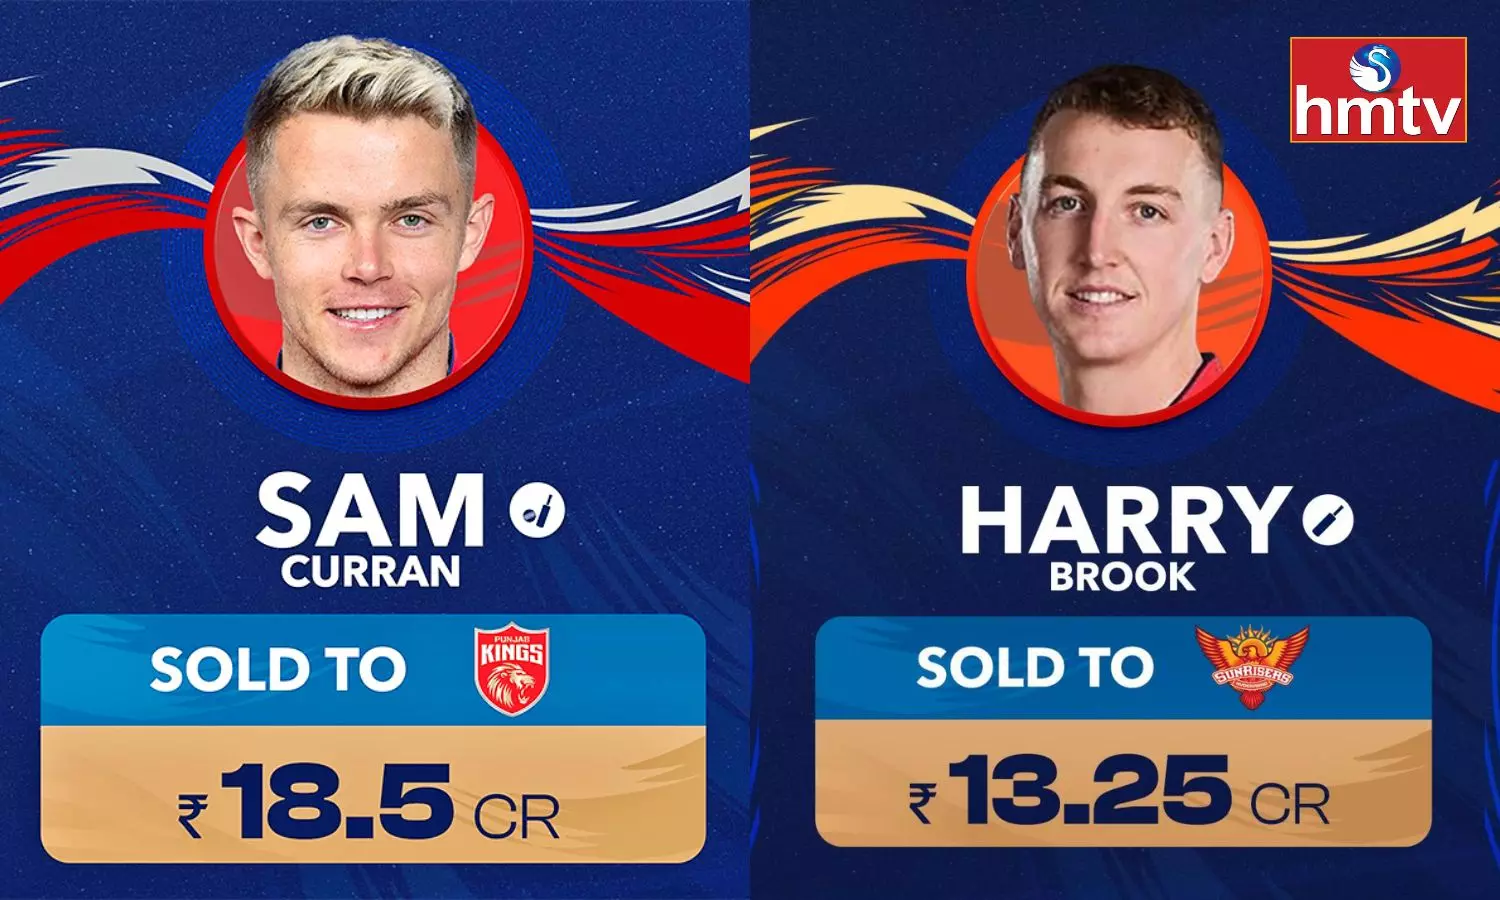 Sam Curran Sold to Punjab Kings for Rs 18.50 Crore! SRH BUY Harry Brook for Rs 13.25 crore